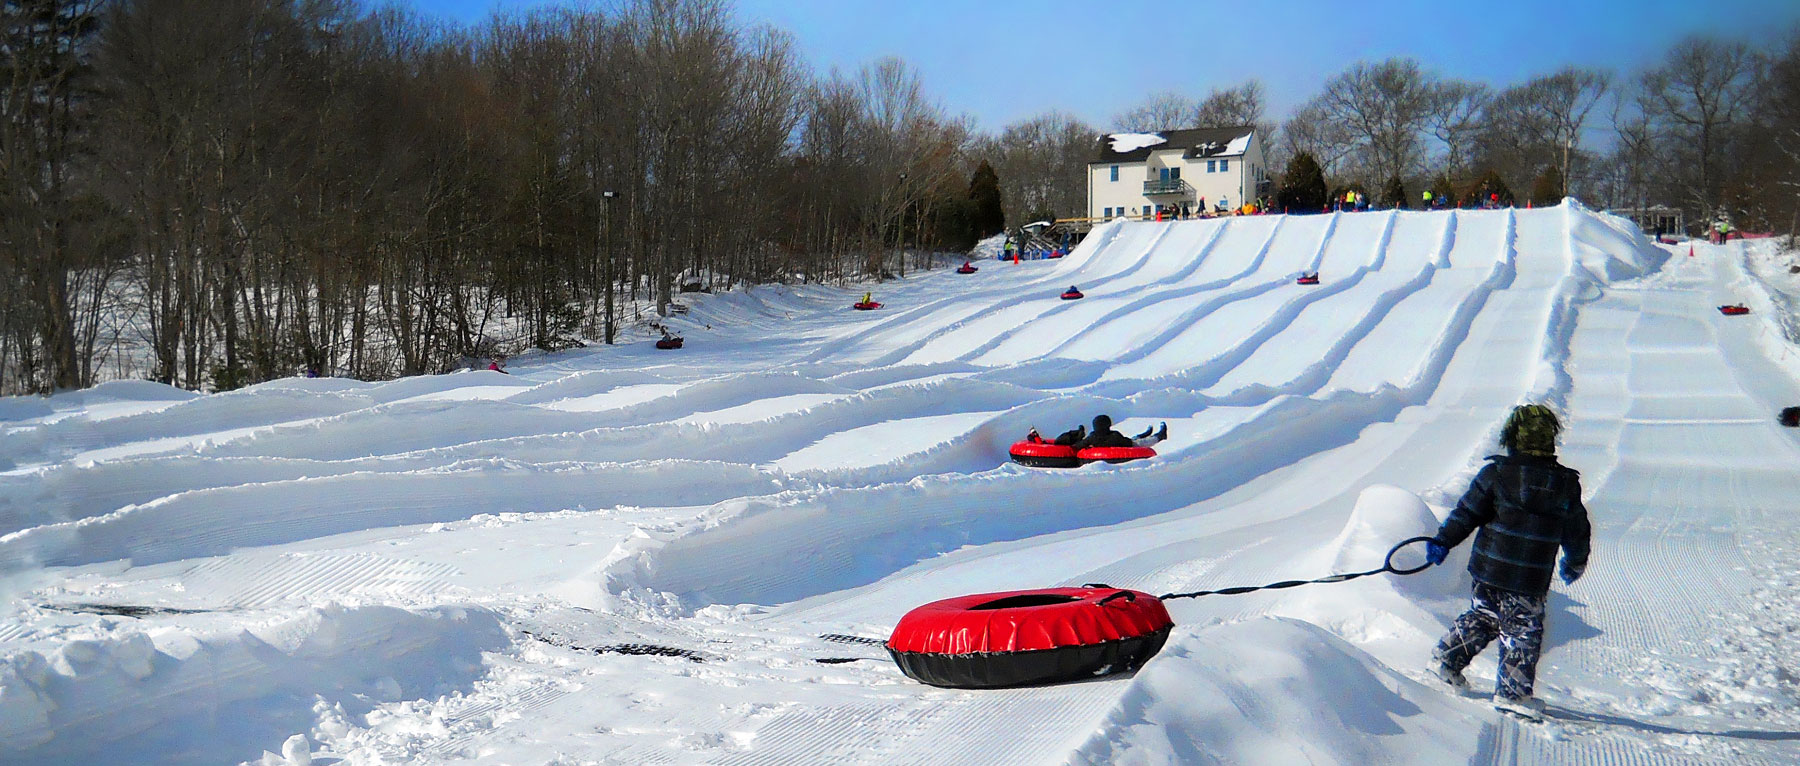 Snow Tubing at Yawgoo Valley Ski Area in Exeter, Rhode Island